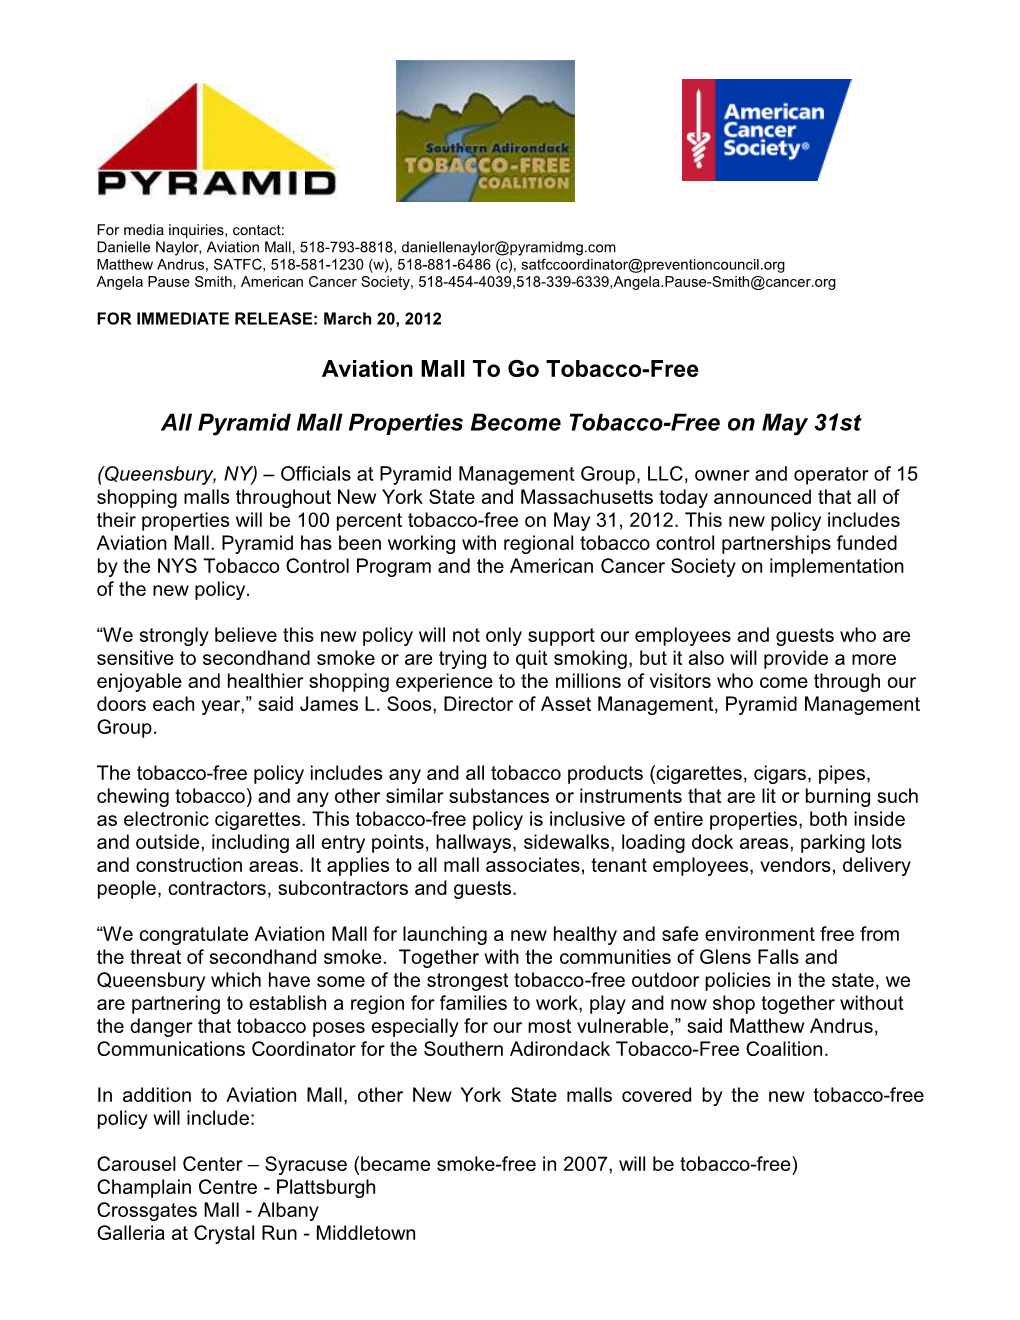 Aviation Mall to Go Tobacco-Free All Pyramid Mall Properties Become